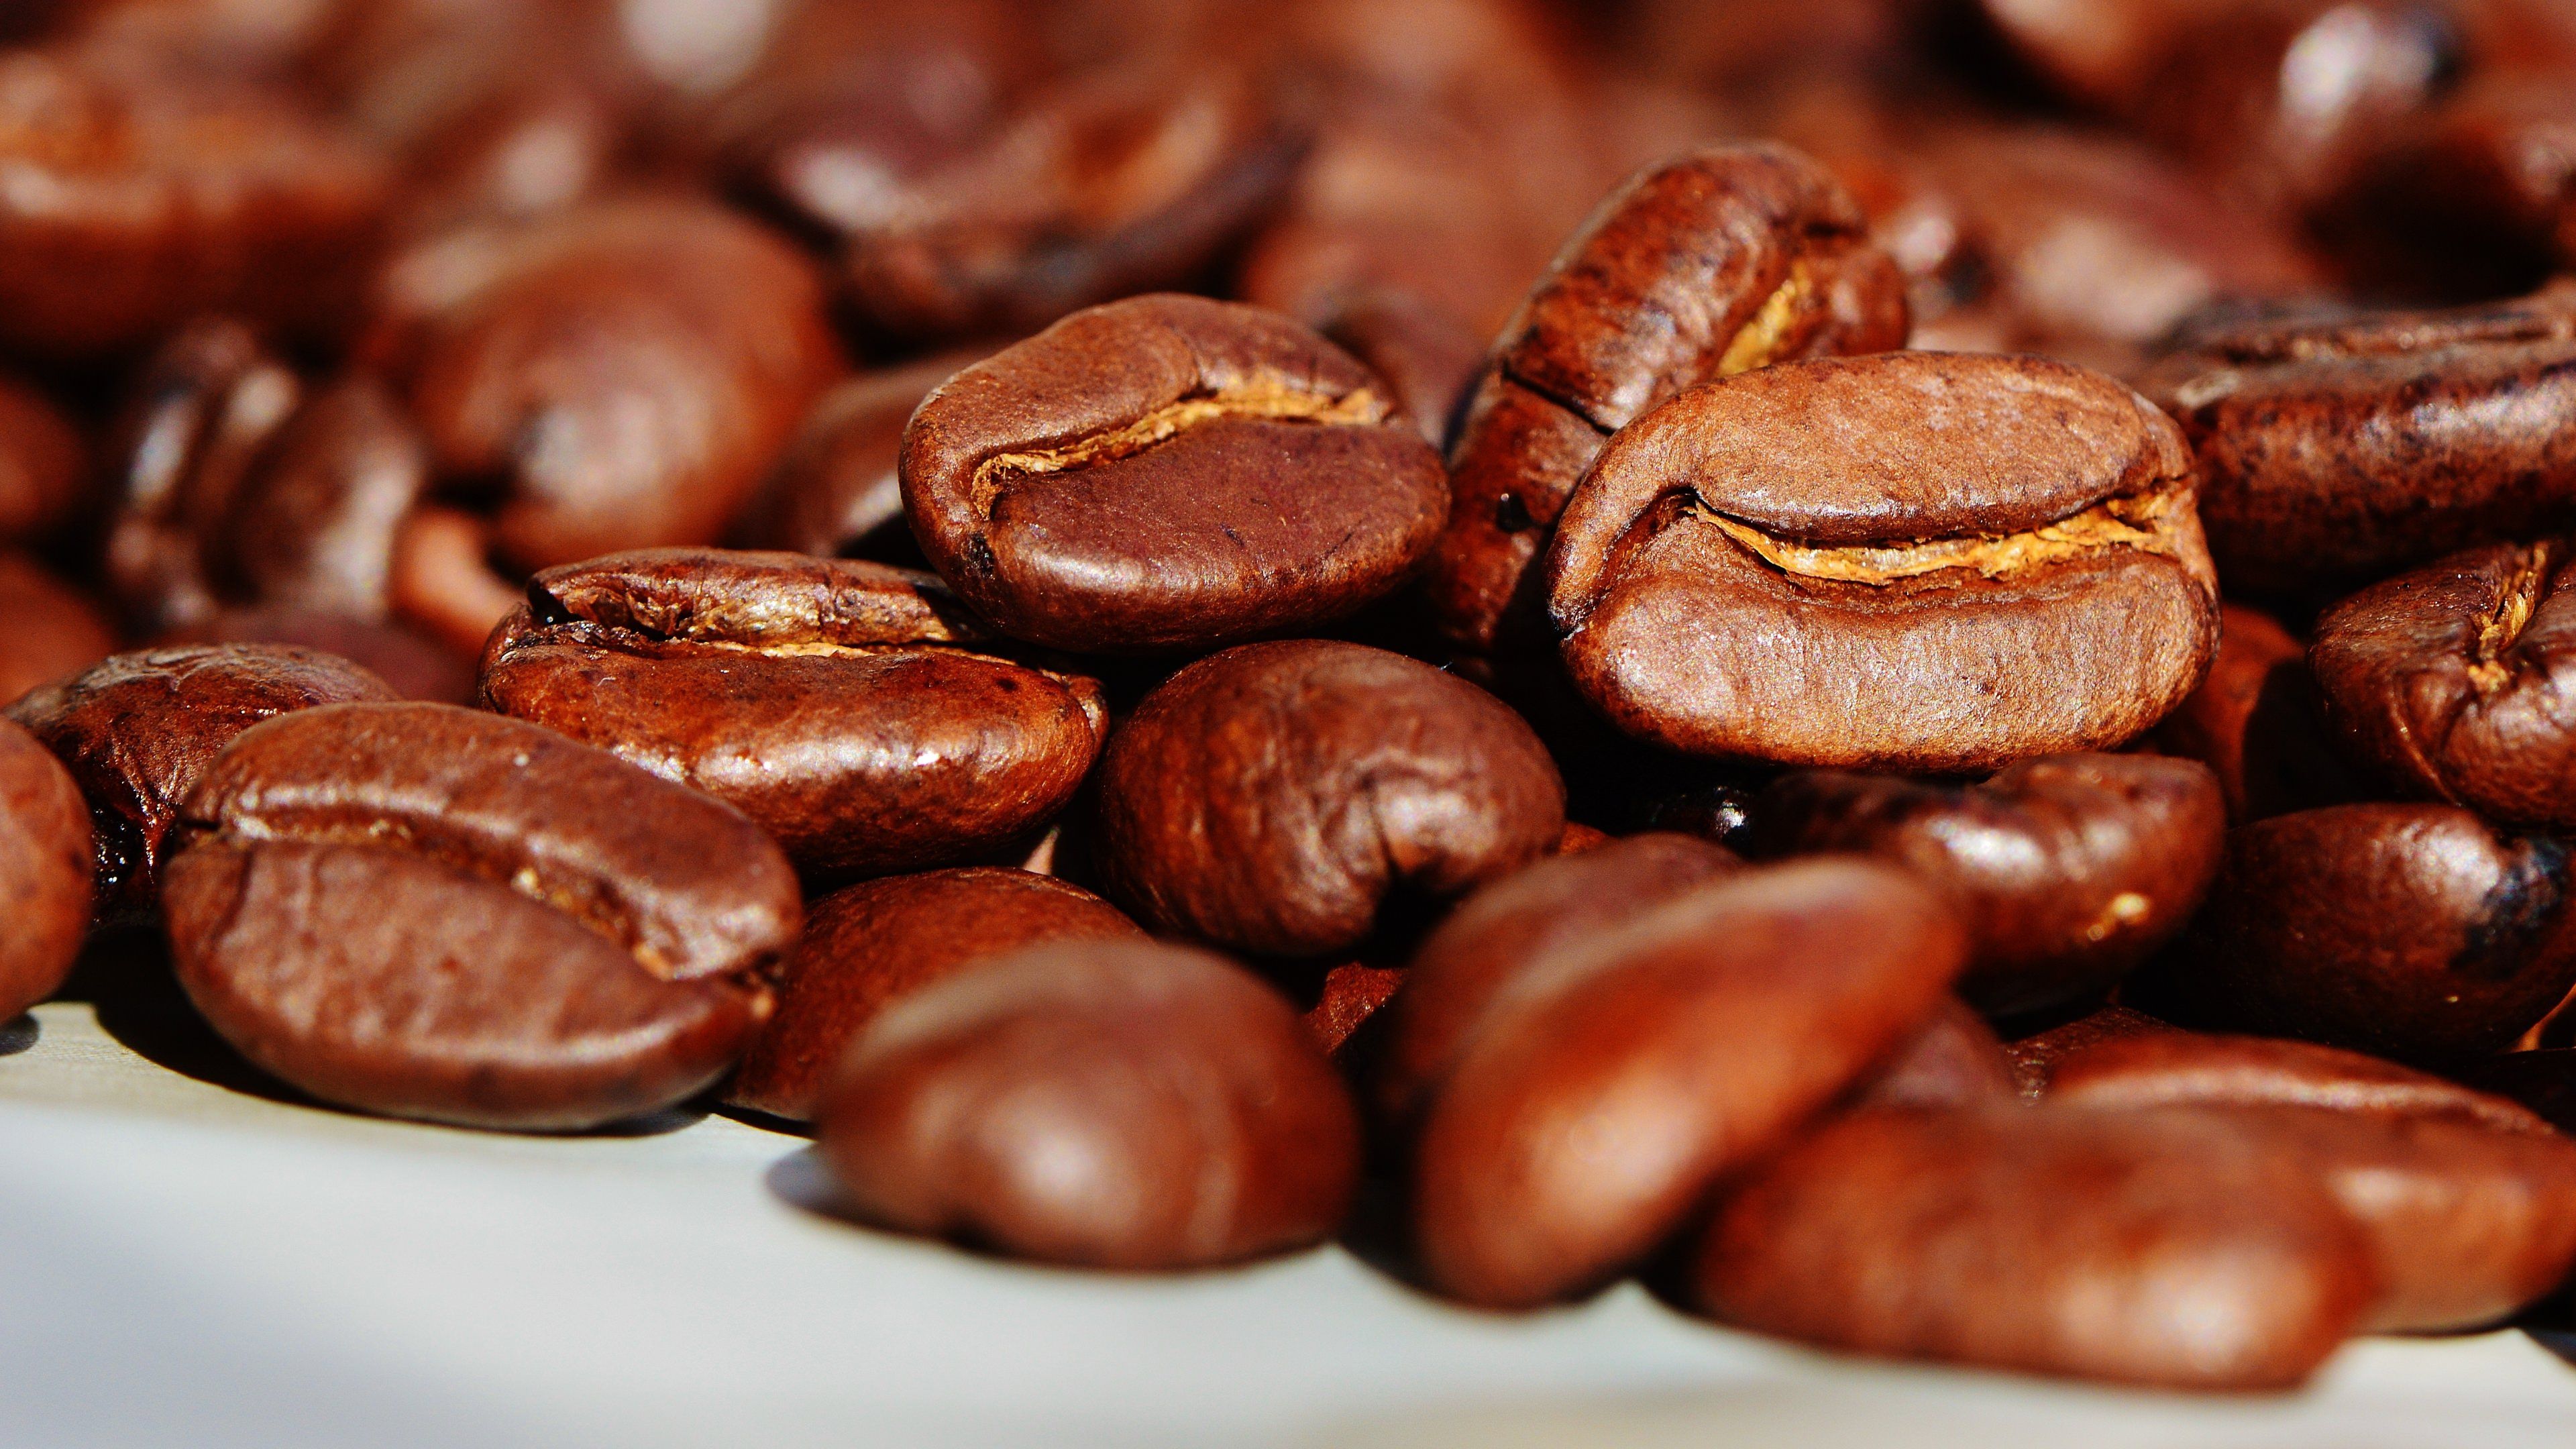 UHD Wallpaper and 4K Desktop Background Free Download: Coffee Beans Macro Roasted (3840x2160)